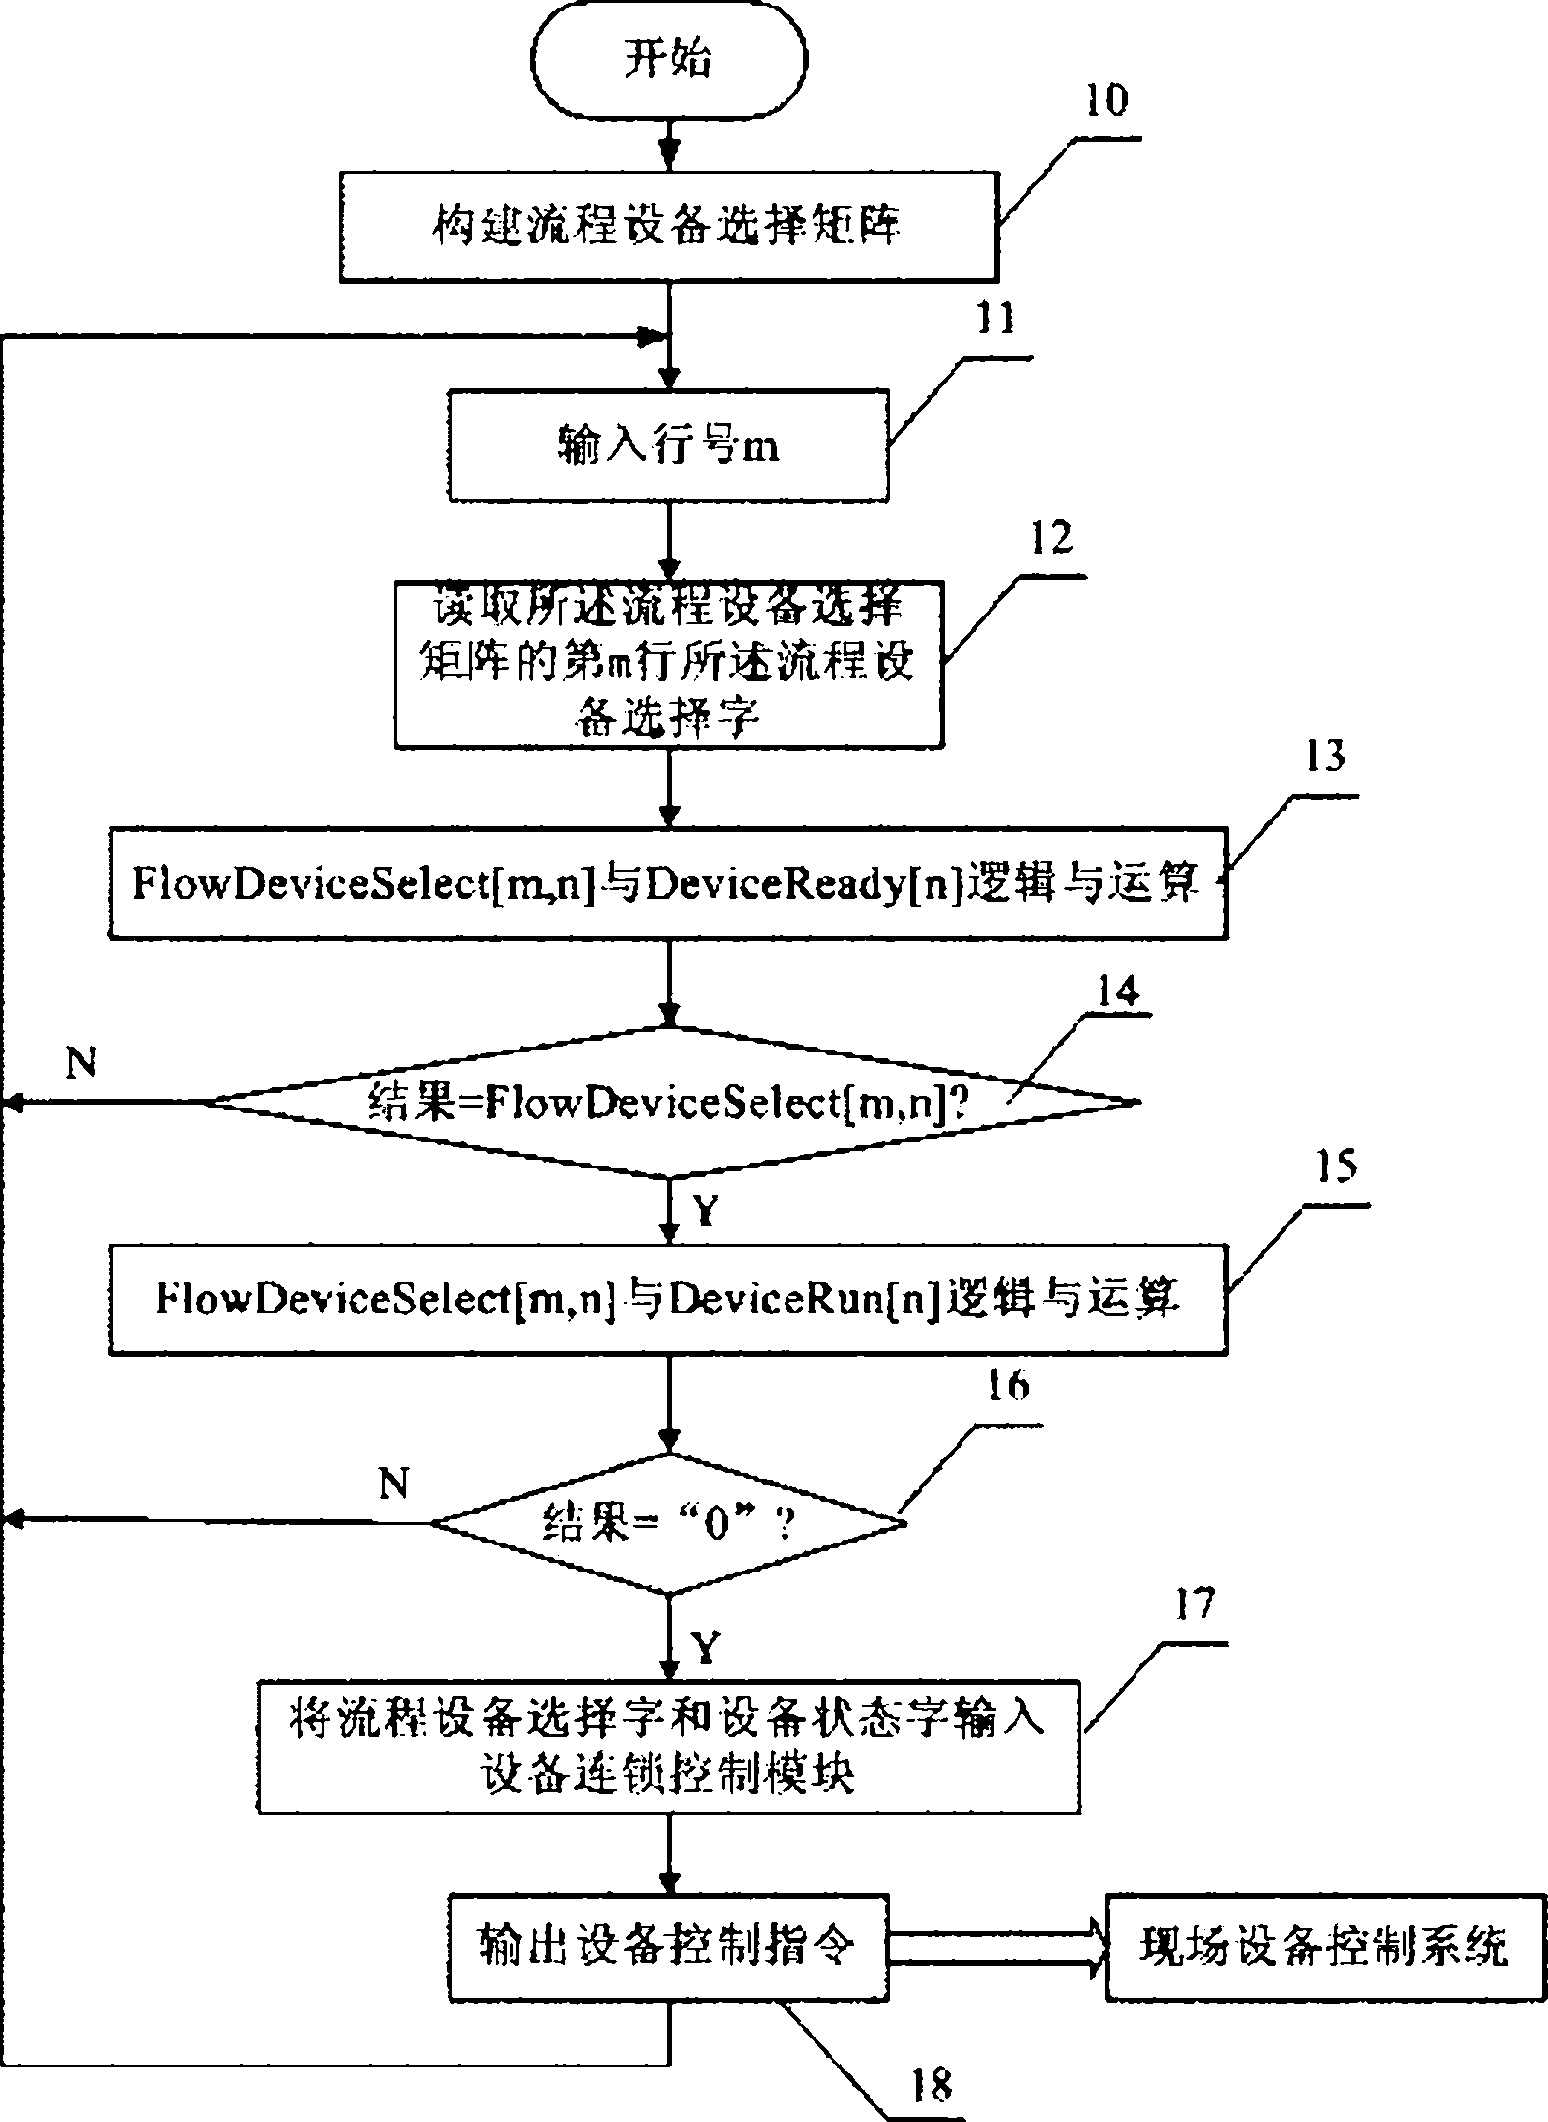 Flow path control method for material handling system of stock yard